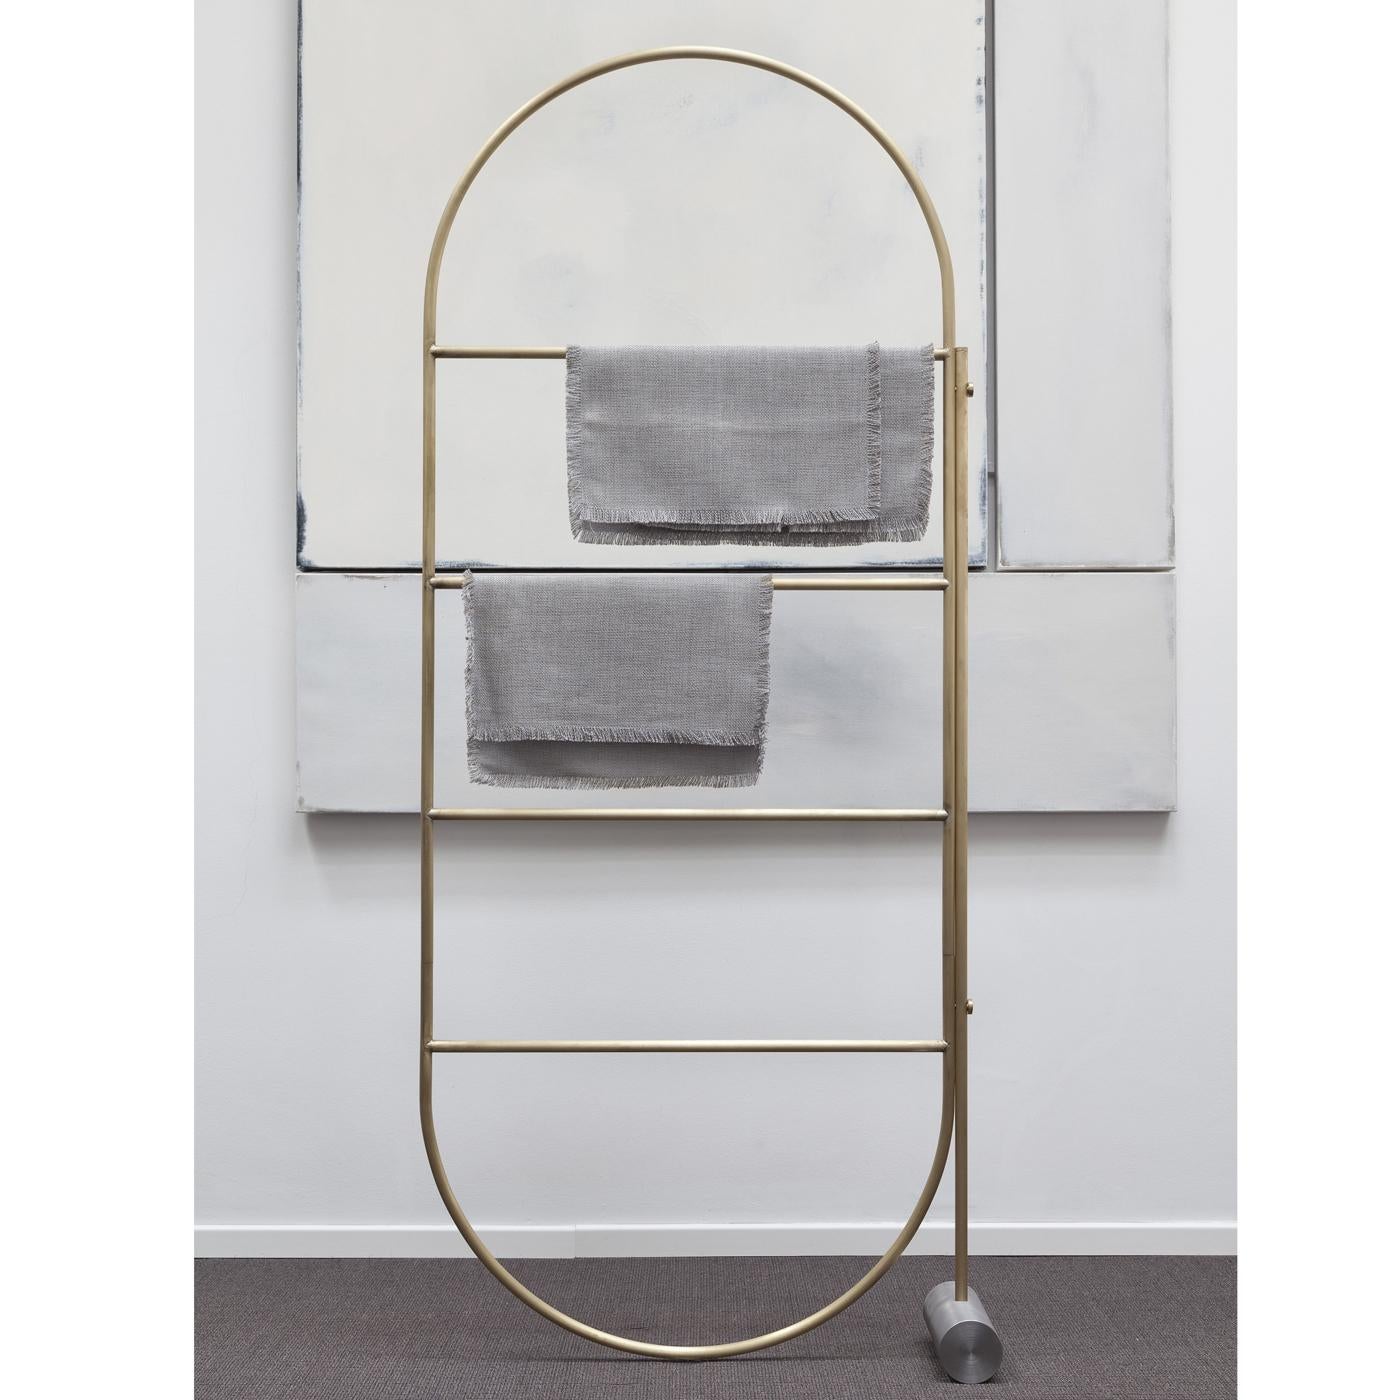 This versatile divider is a multi-functional piece of design that can be crafted in brass or varnished iron. It was made entirely by hand and its vertical metal frame mixes with the gentle curves of its top and bottom. The translucent natural fabric